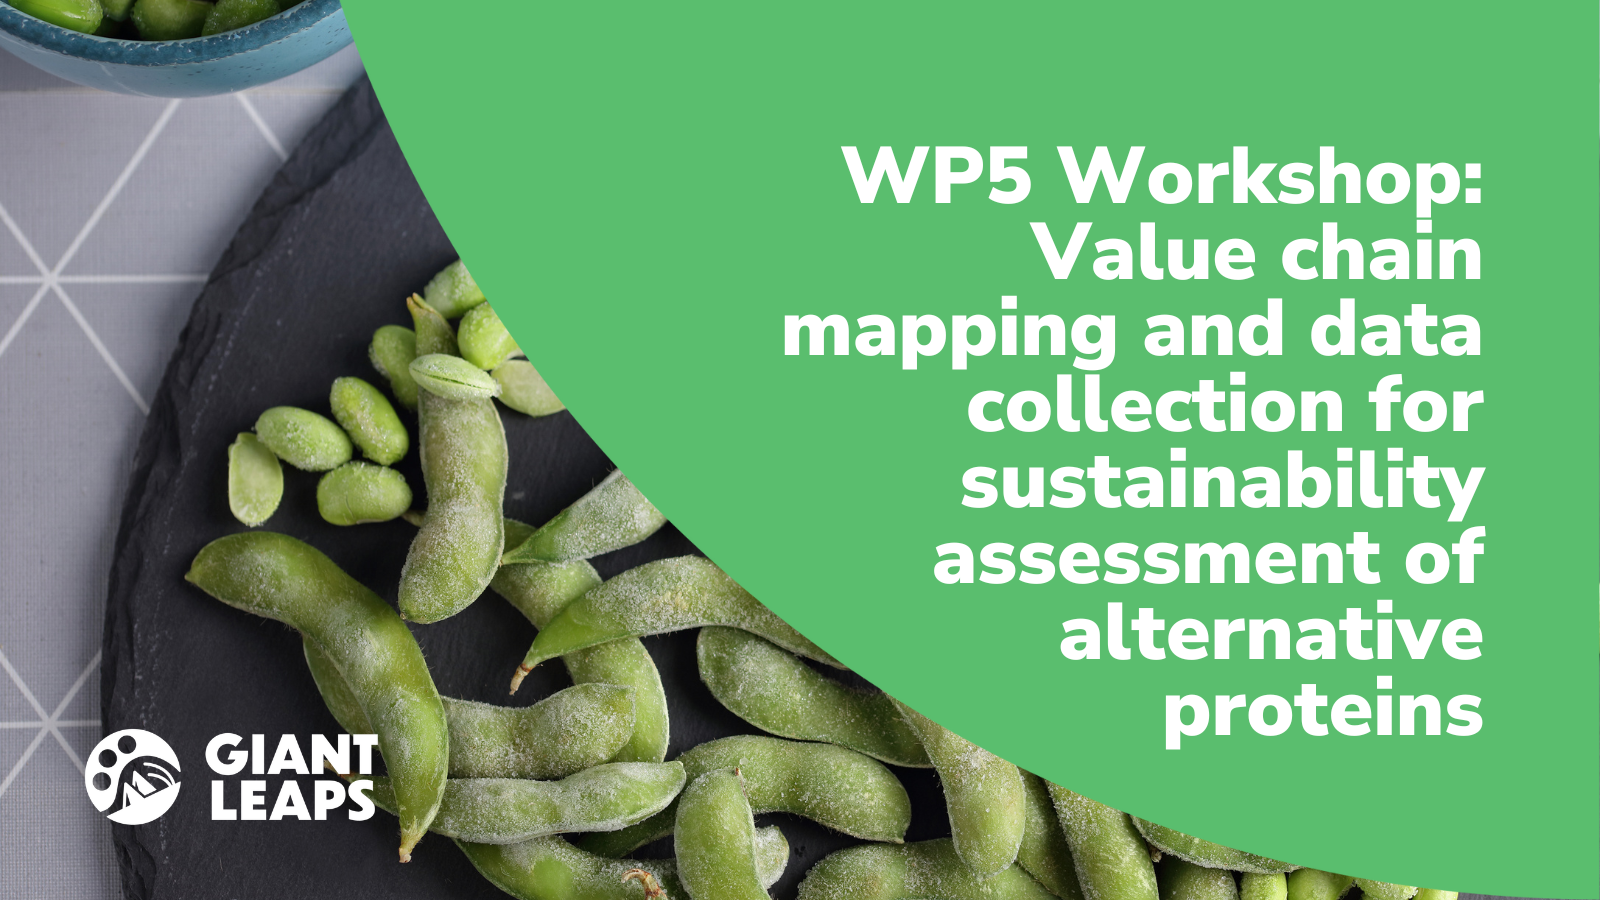 WP5 Workshop: Value chain mapping and data collection for sustainability assessment of alternative proteins